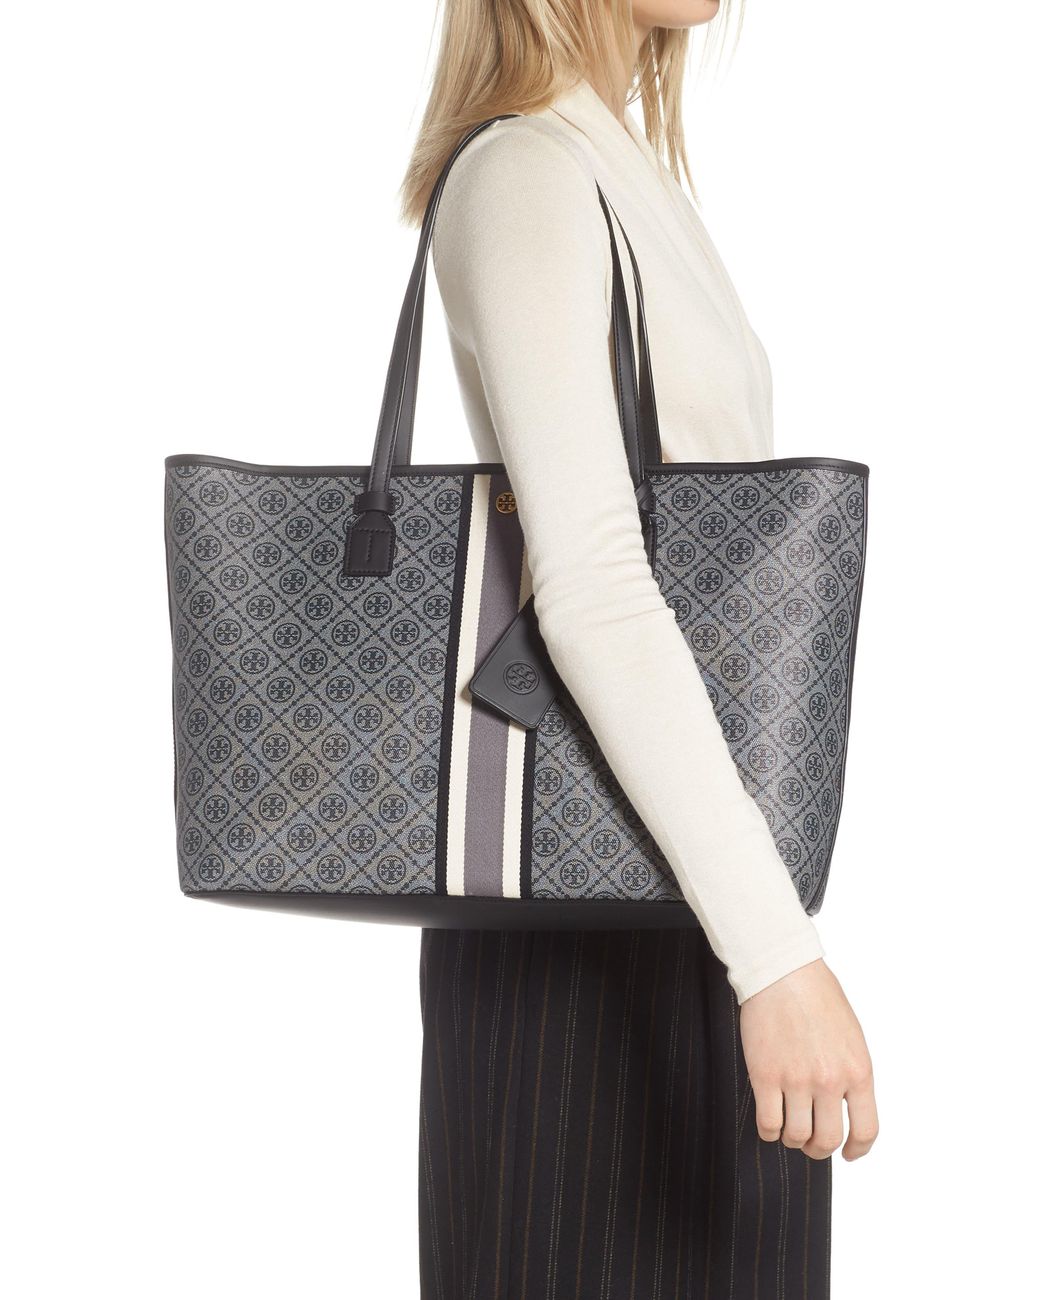 Tory Burch T Monogram Coated Canvas Large Tote / Grey/ Brown/ $398